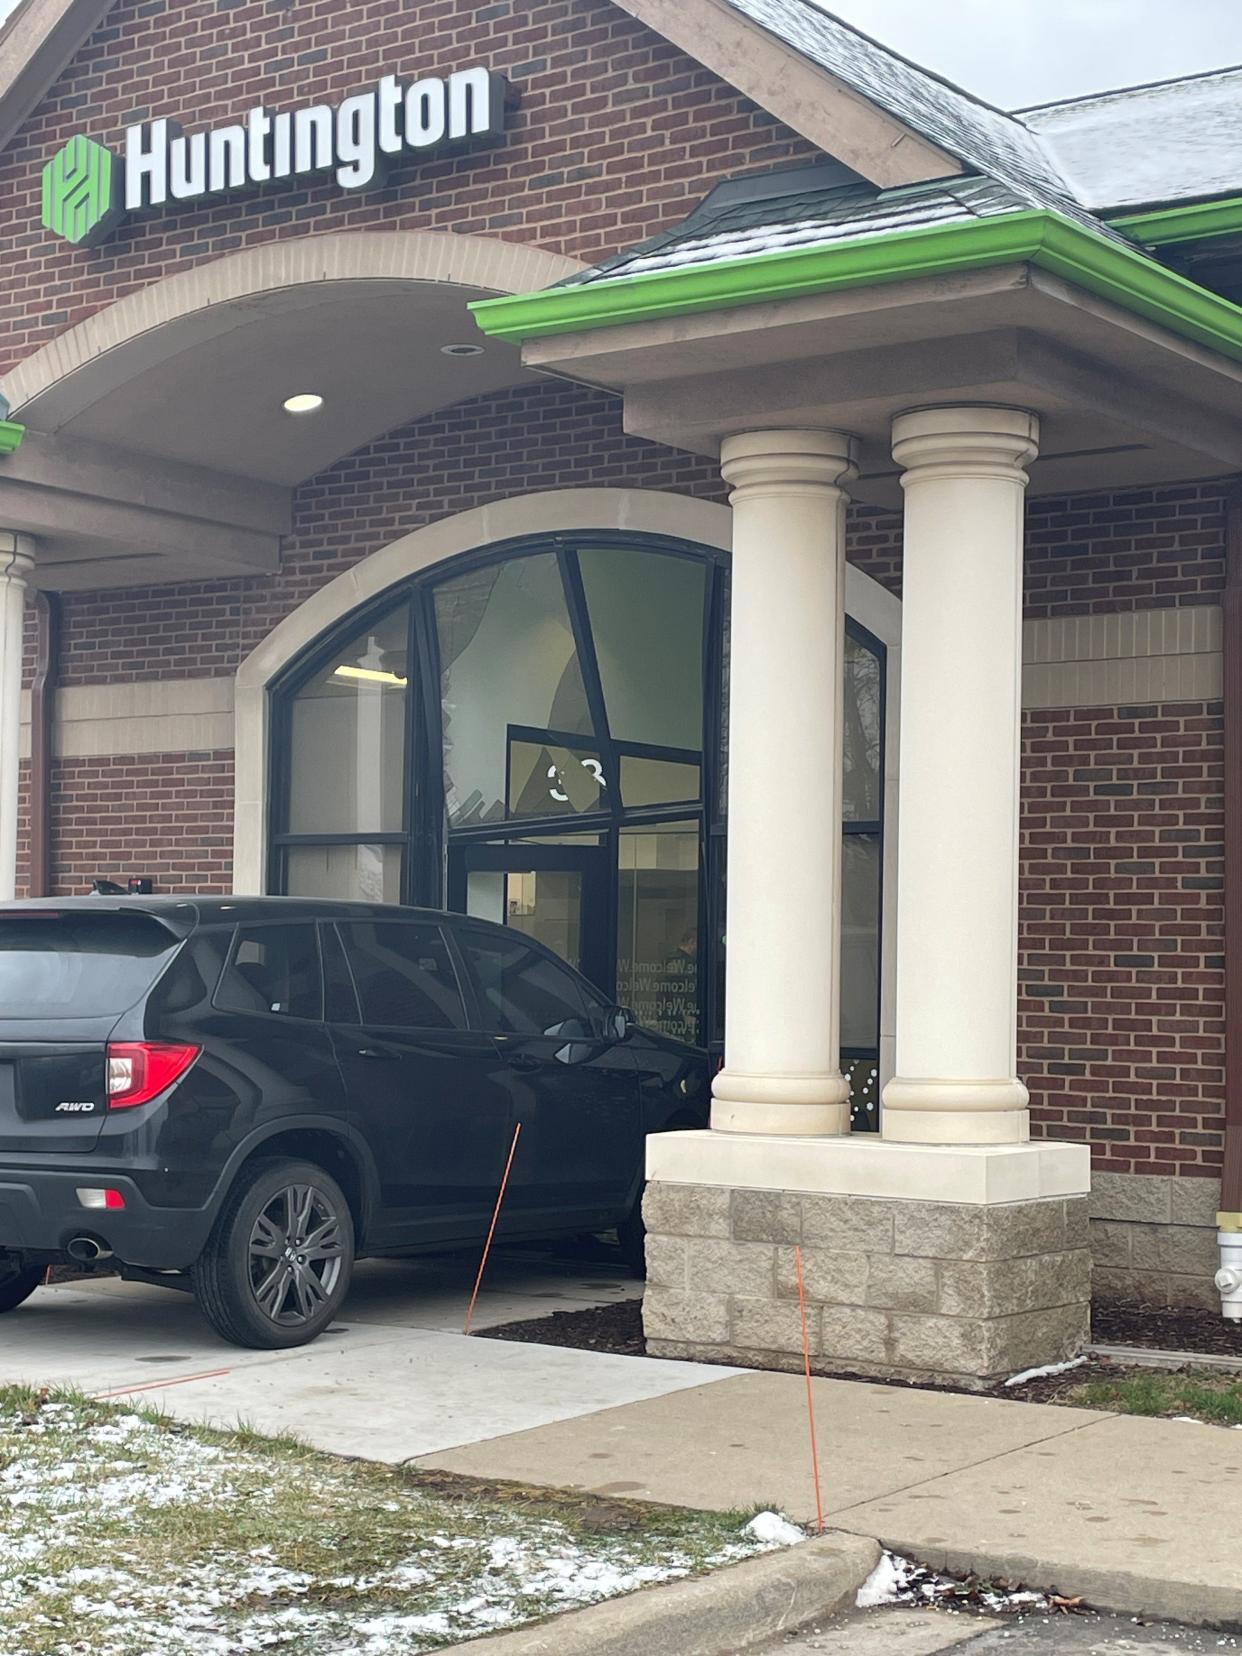 Police say they've arrested a 42-year-old Howell man they allege crashed his SUV intentionally into a Huntington Bank before fleeing on foot.